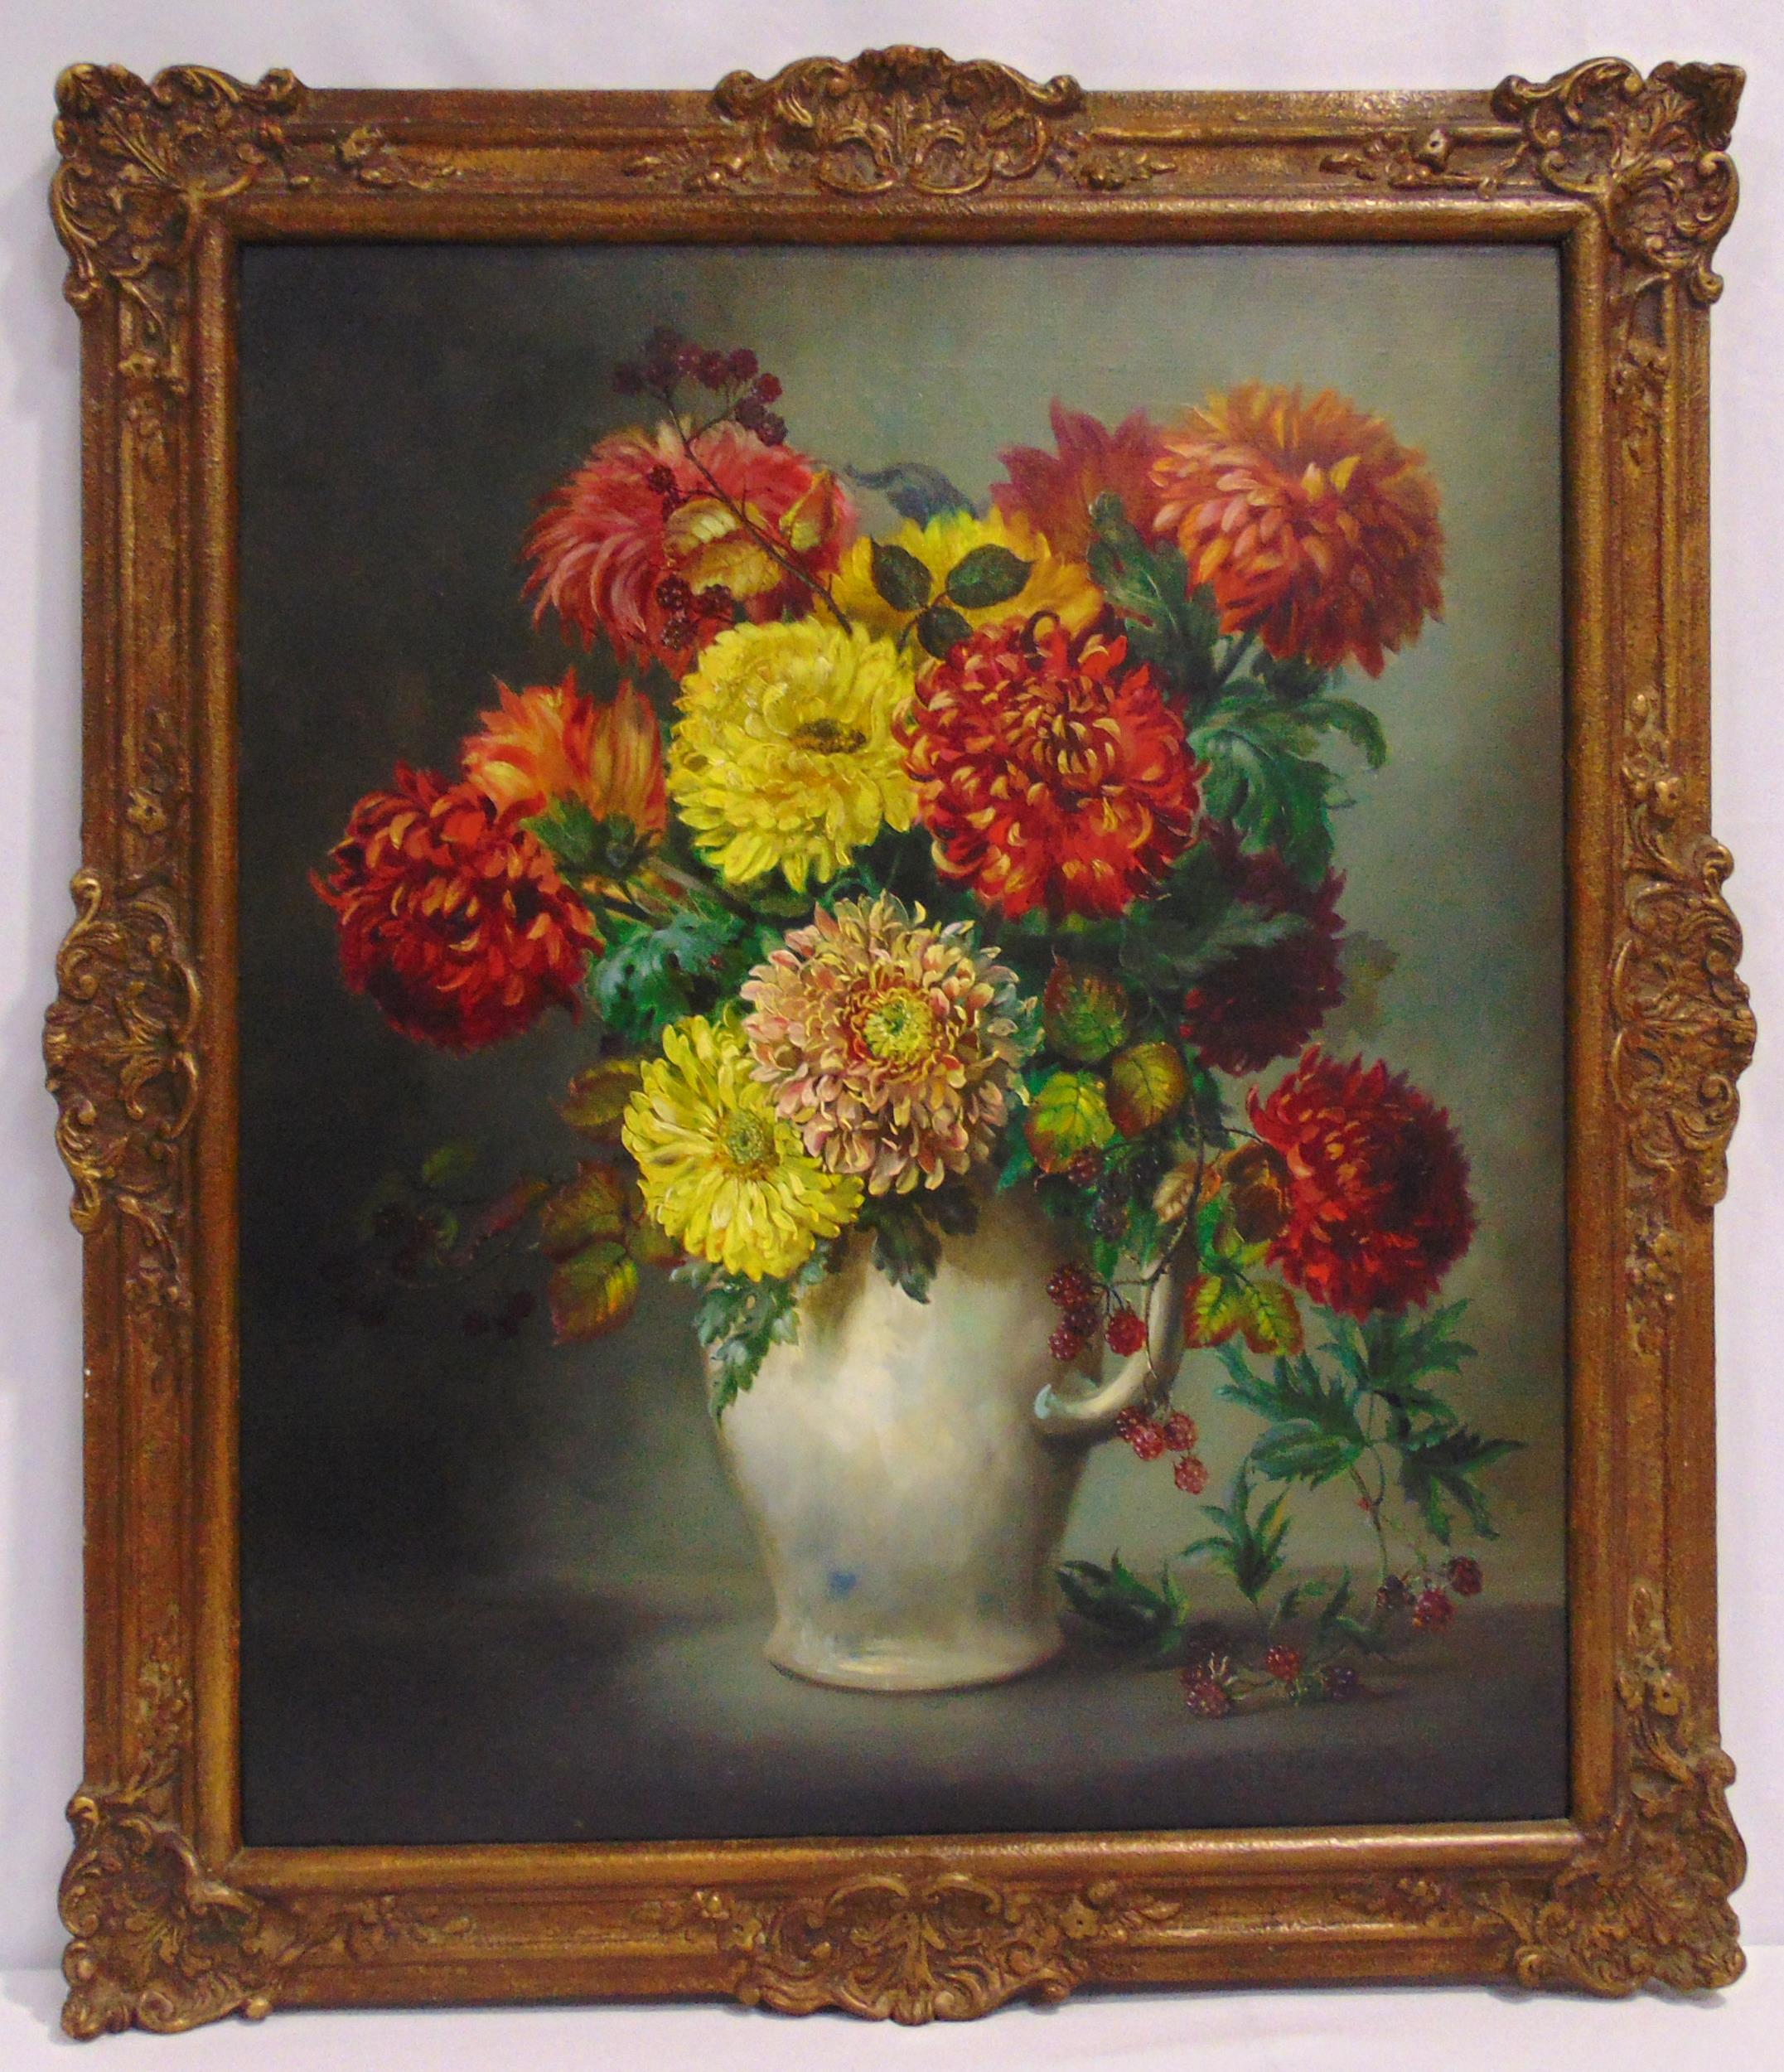 Cecil Kennedy framed oil on canvas still life of flowers in a jug, signed bottom right, 60 x 50cm